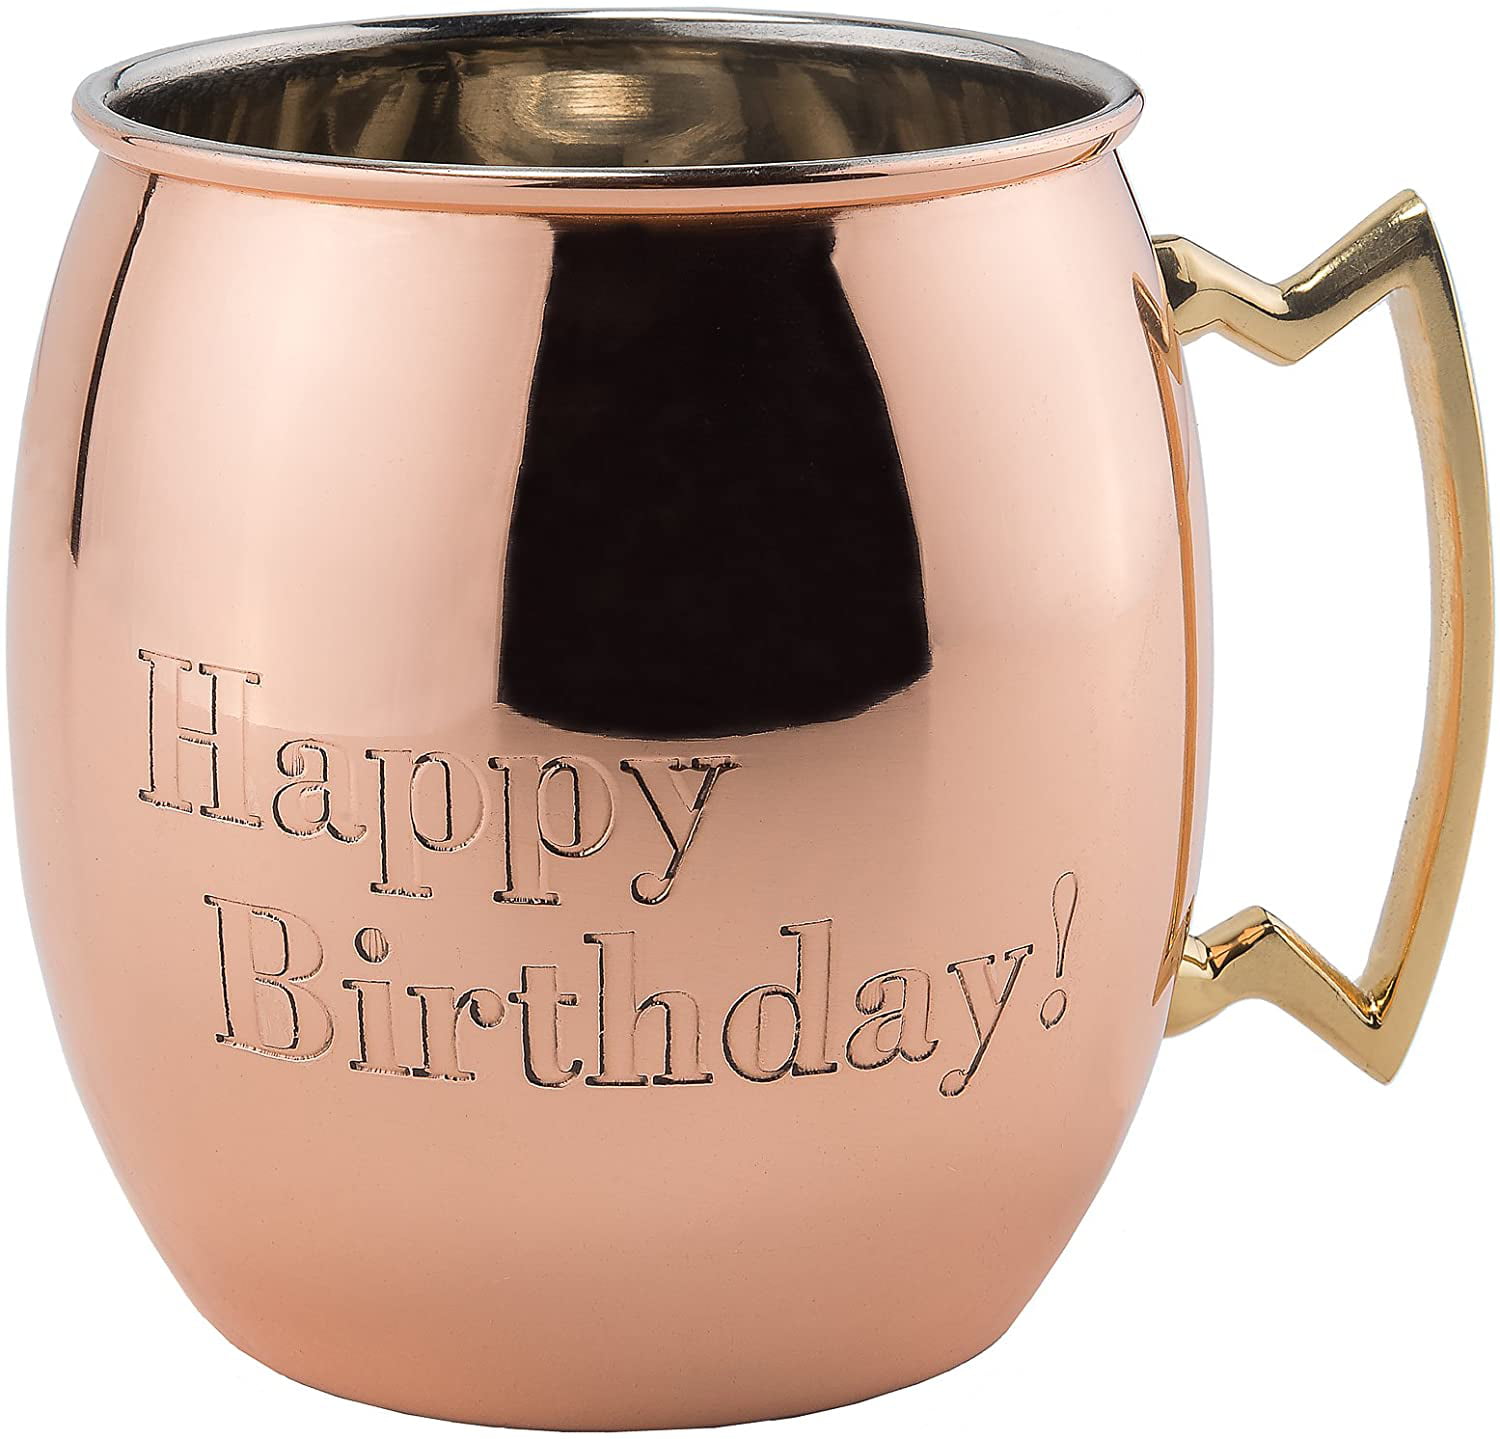 Copper Old Dutch International Solid Moscow Mule Mug Monogrammed C Set of 4 16-Ounce 